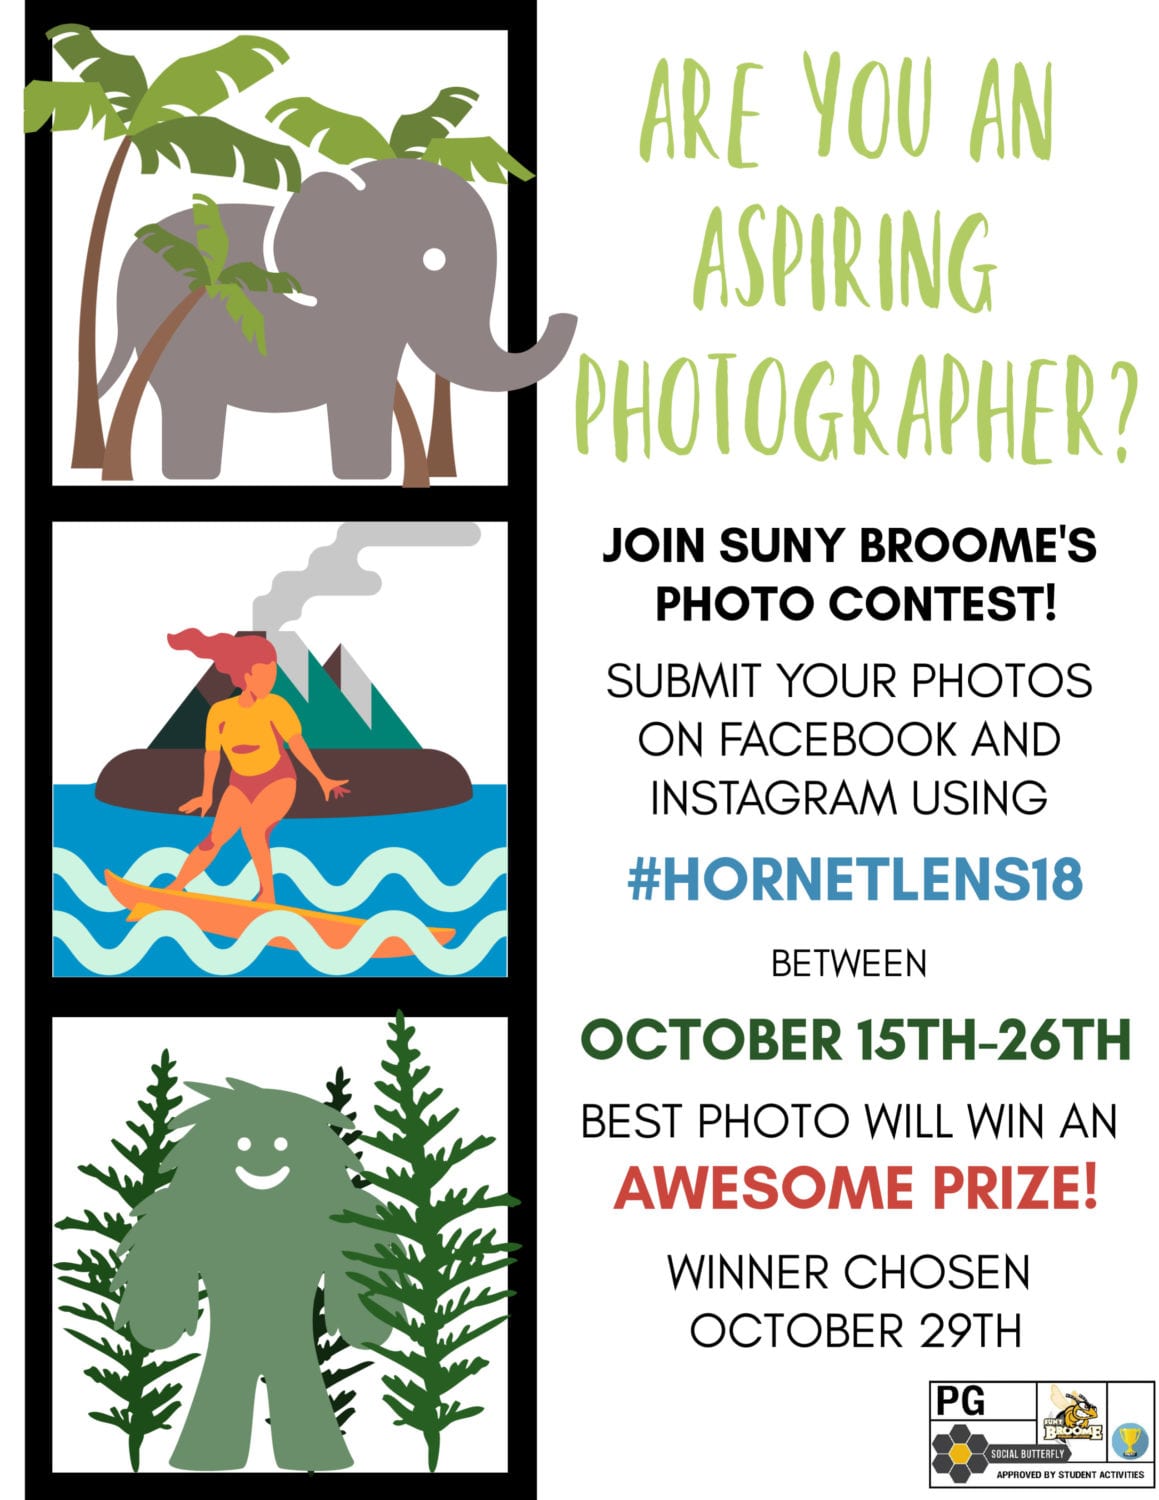 Enter the SUNY Broome Photo Contest from Oct. 15 – 26